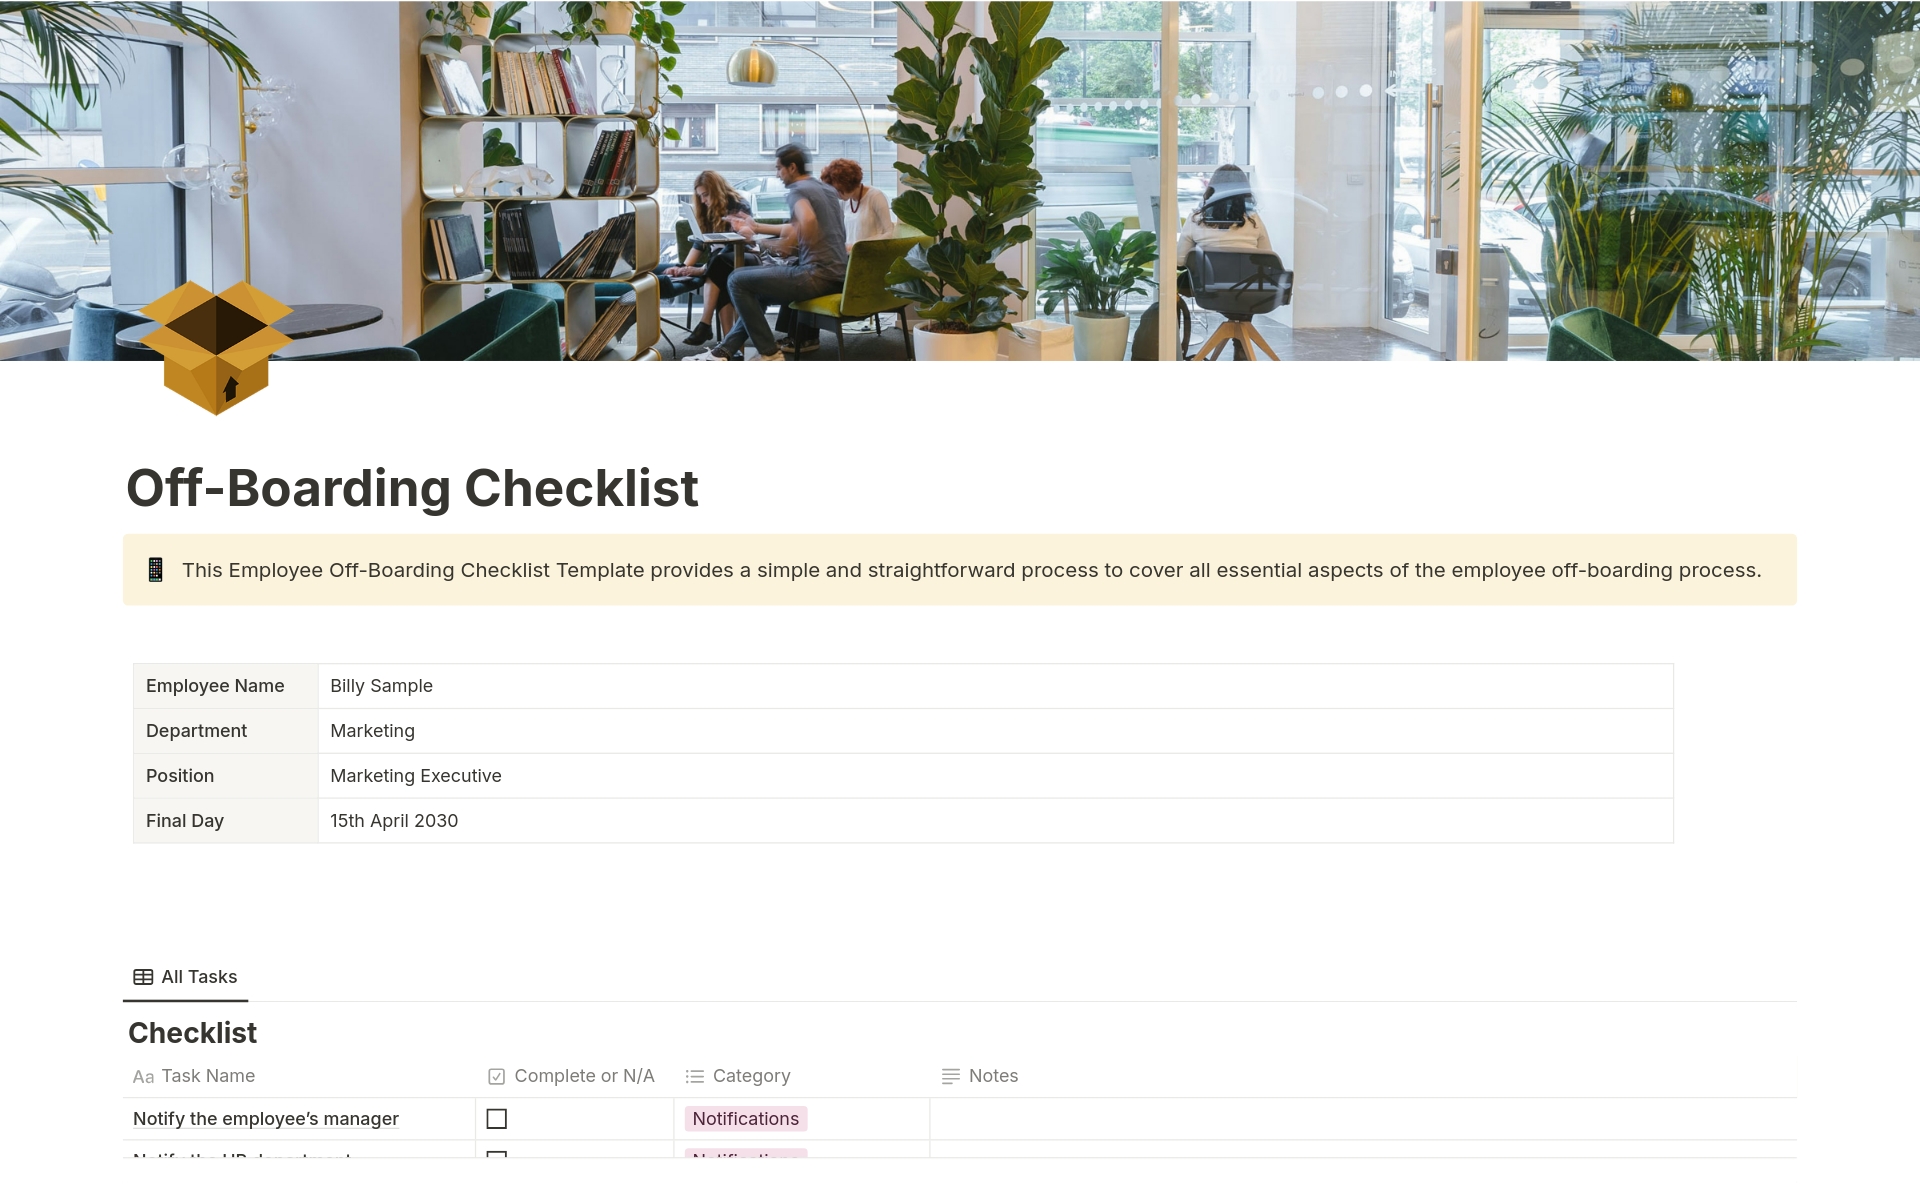 This Employee Offboarding Checklist Template provides a simple and straightforward process to cover all essential aspects of the employee off-boarding process.